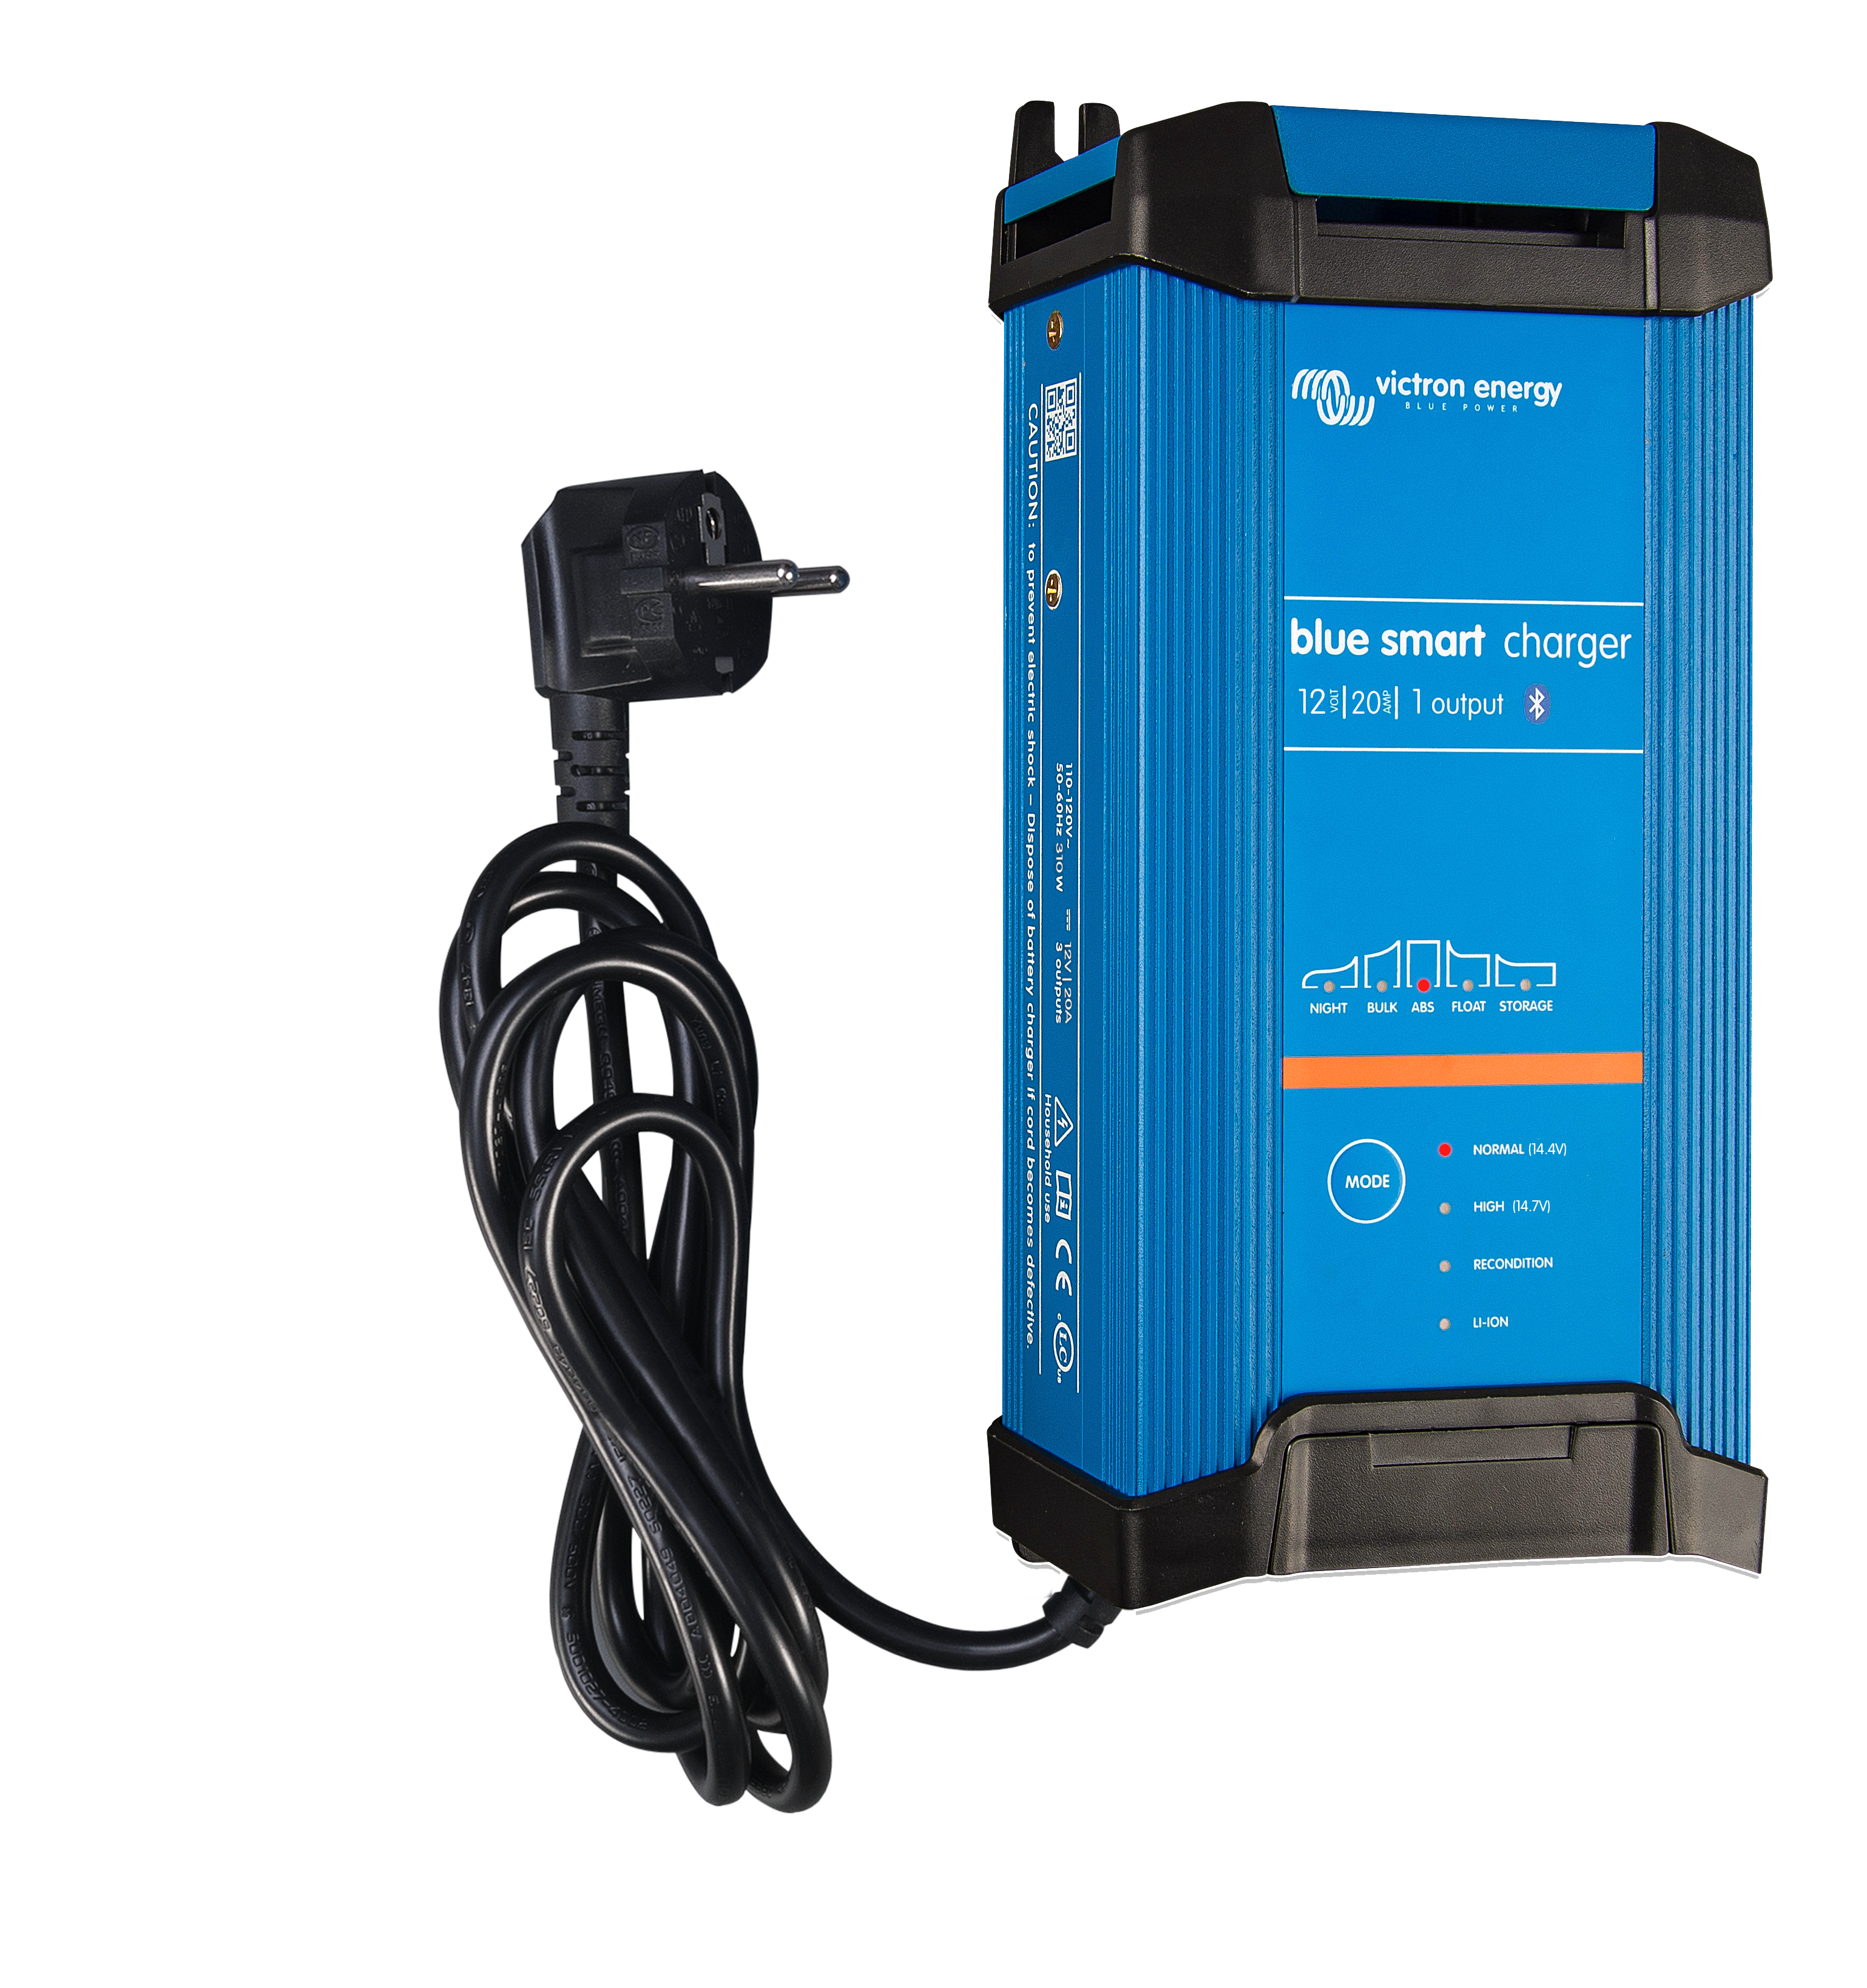 Blue Smart IP22 Charger - Victron Energy